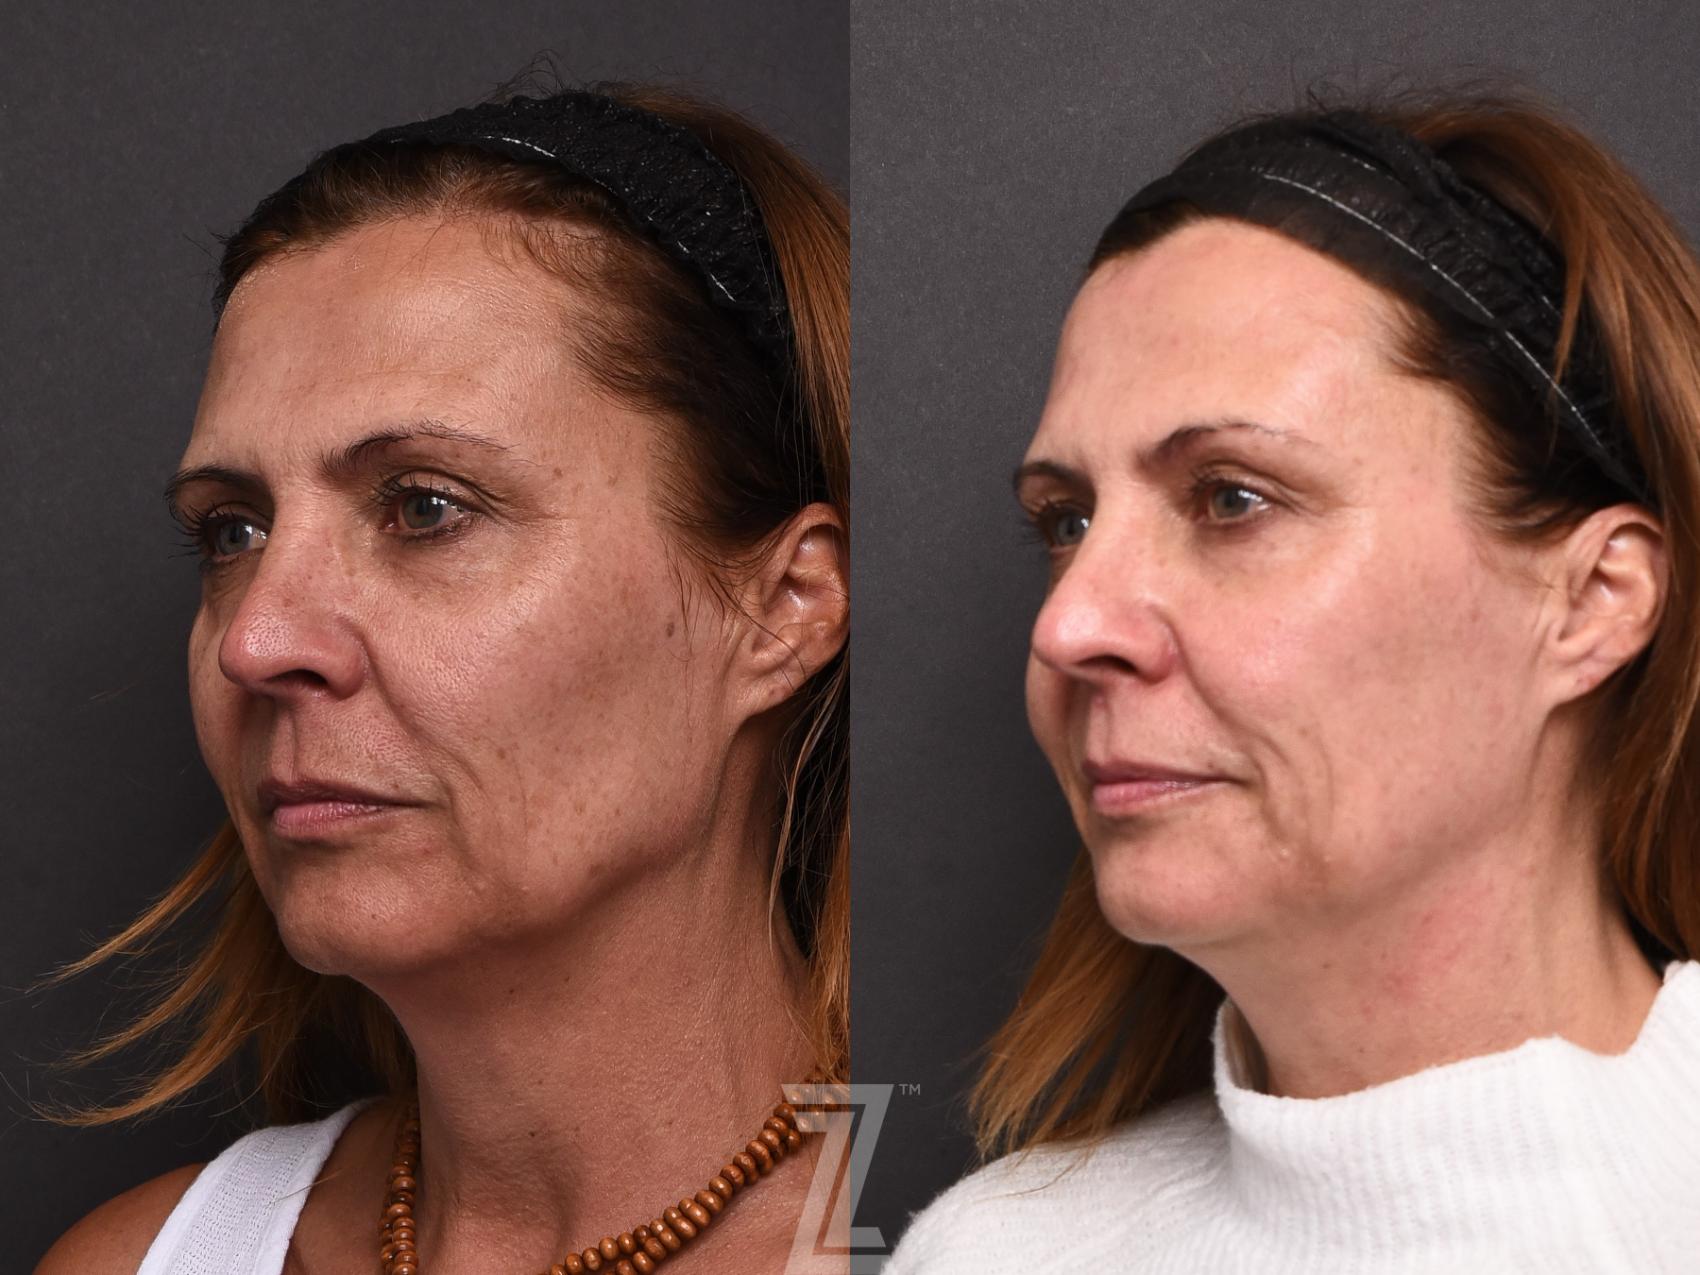 HALO Before & After Photo | Austin, TX | The Piazza Center for Plastic Surgery & Advanced Skin Care